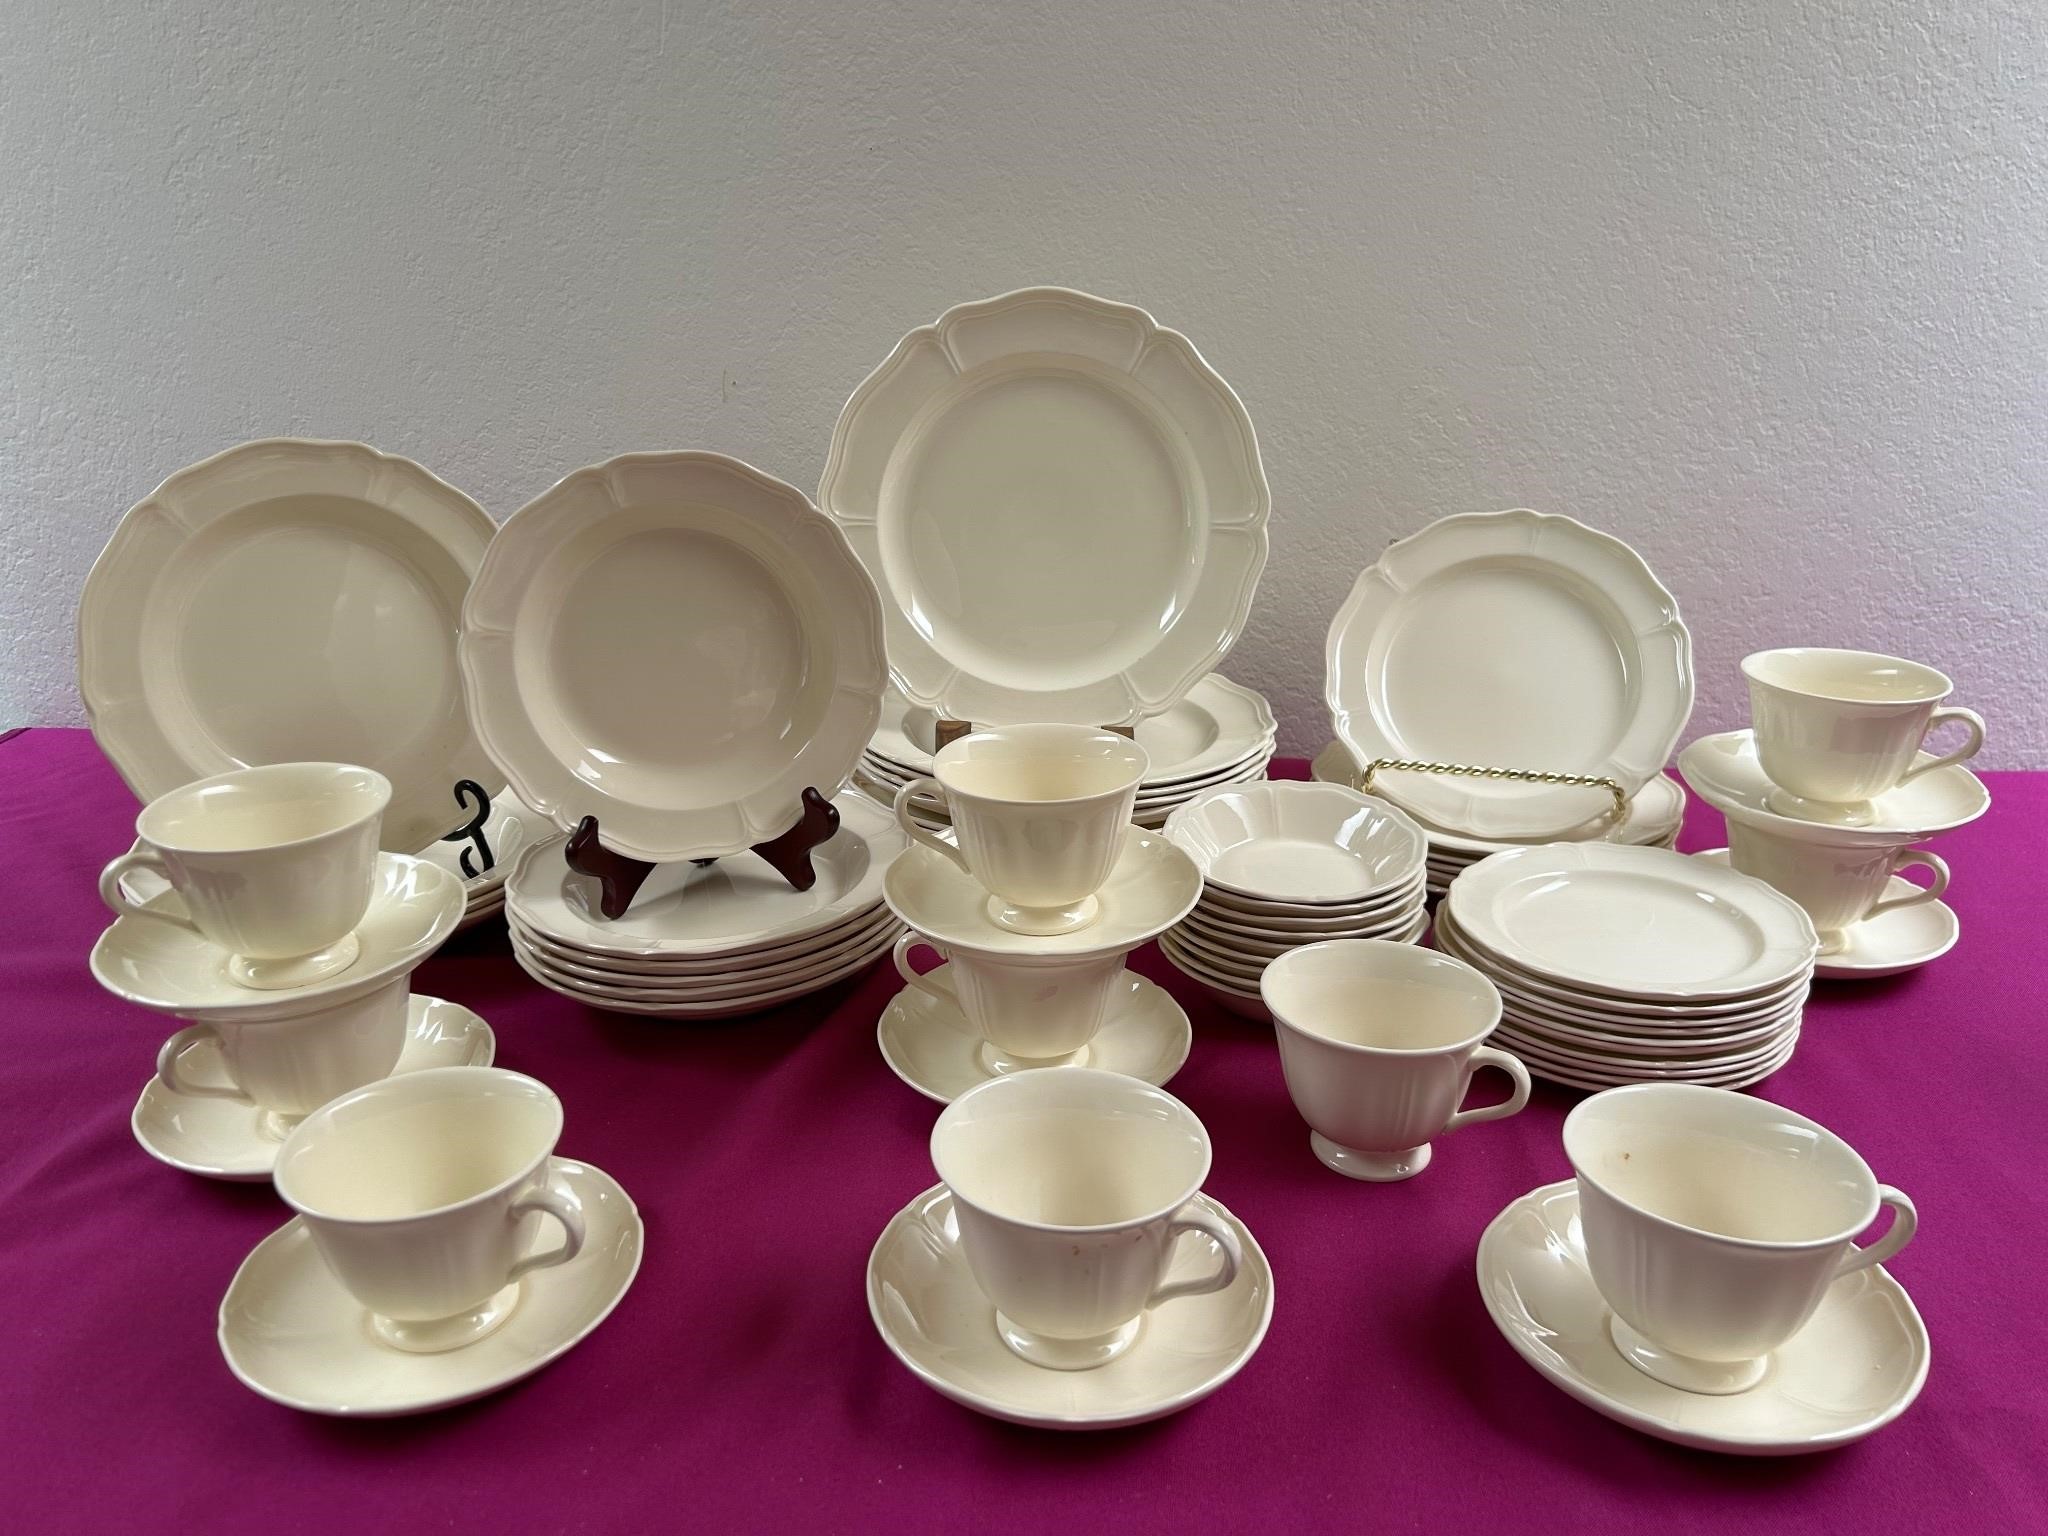 ‘Queens Plain’ by Wedgwood China Dinnerware